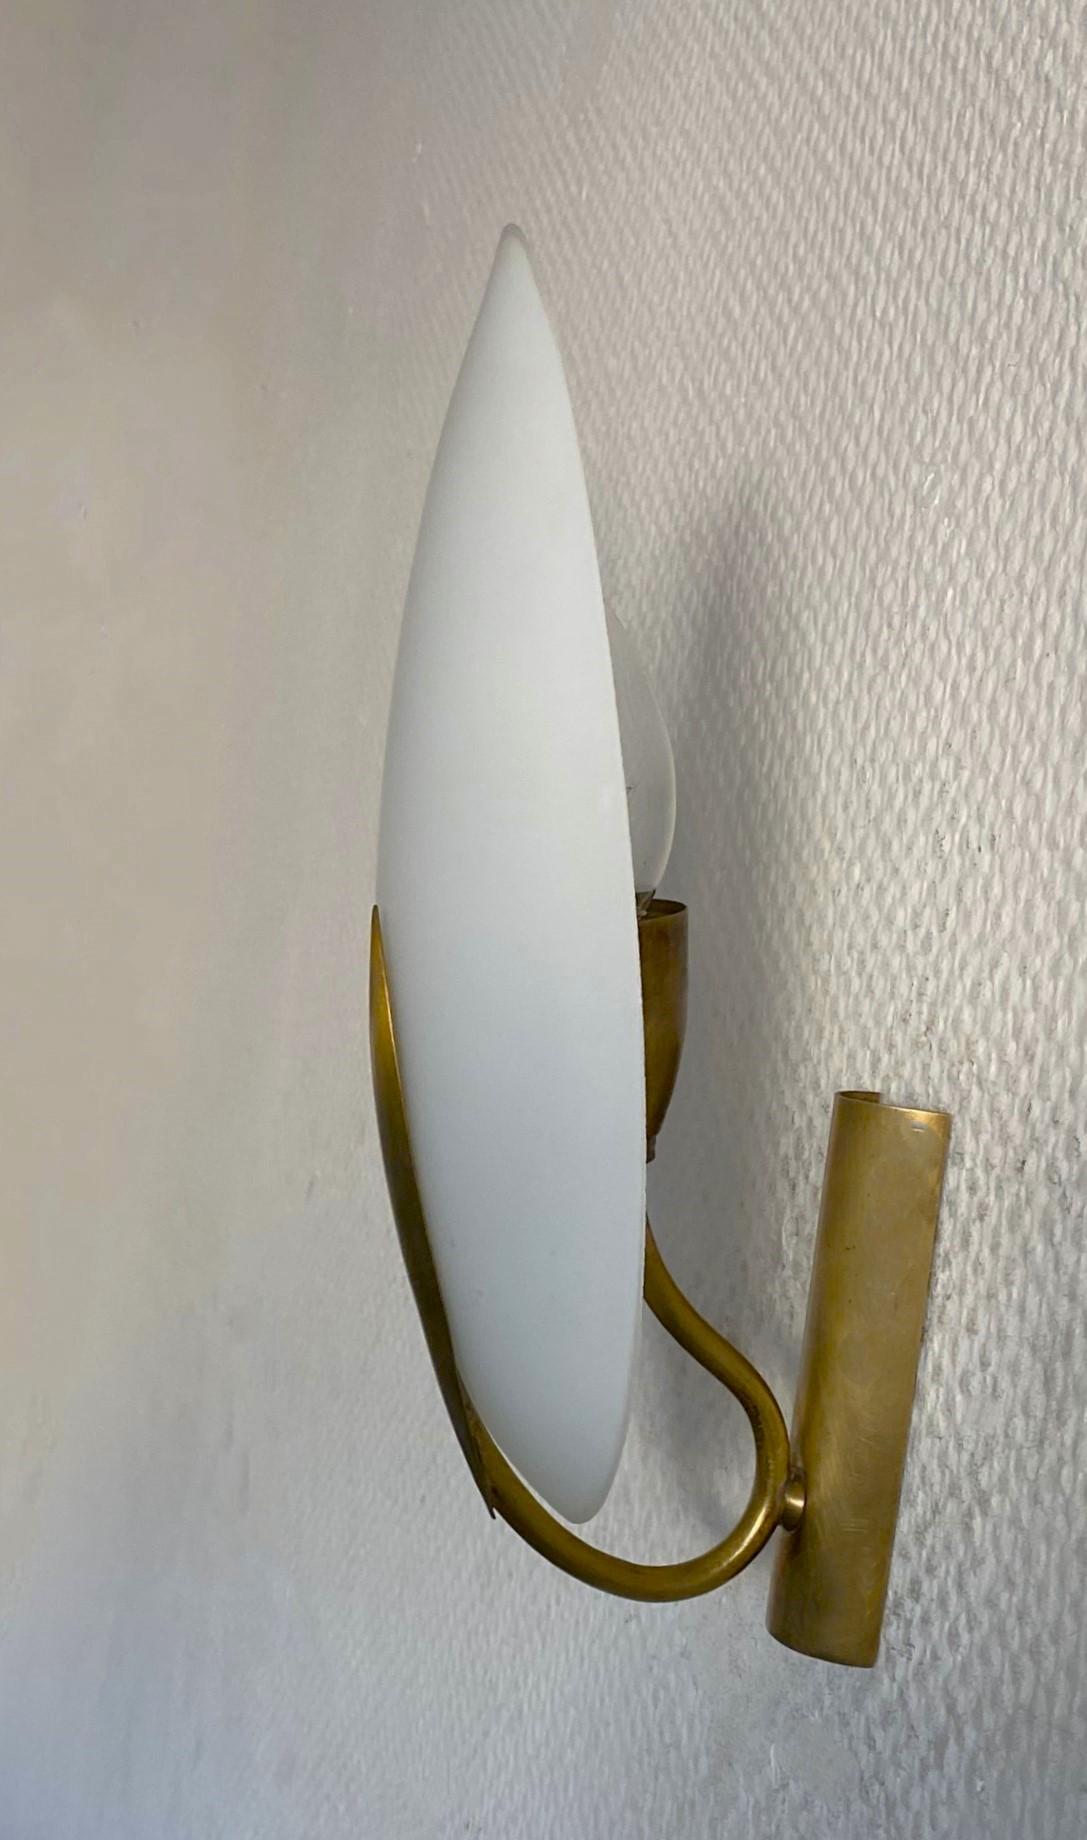 Italian Pair of Max Ingrand White Glass Brass Wall Sconces for Fontana Arte Italy, 1950s For Sale